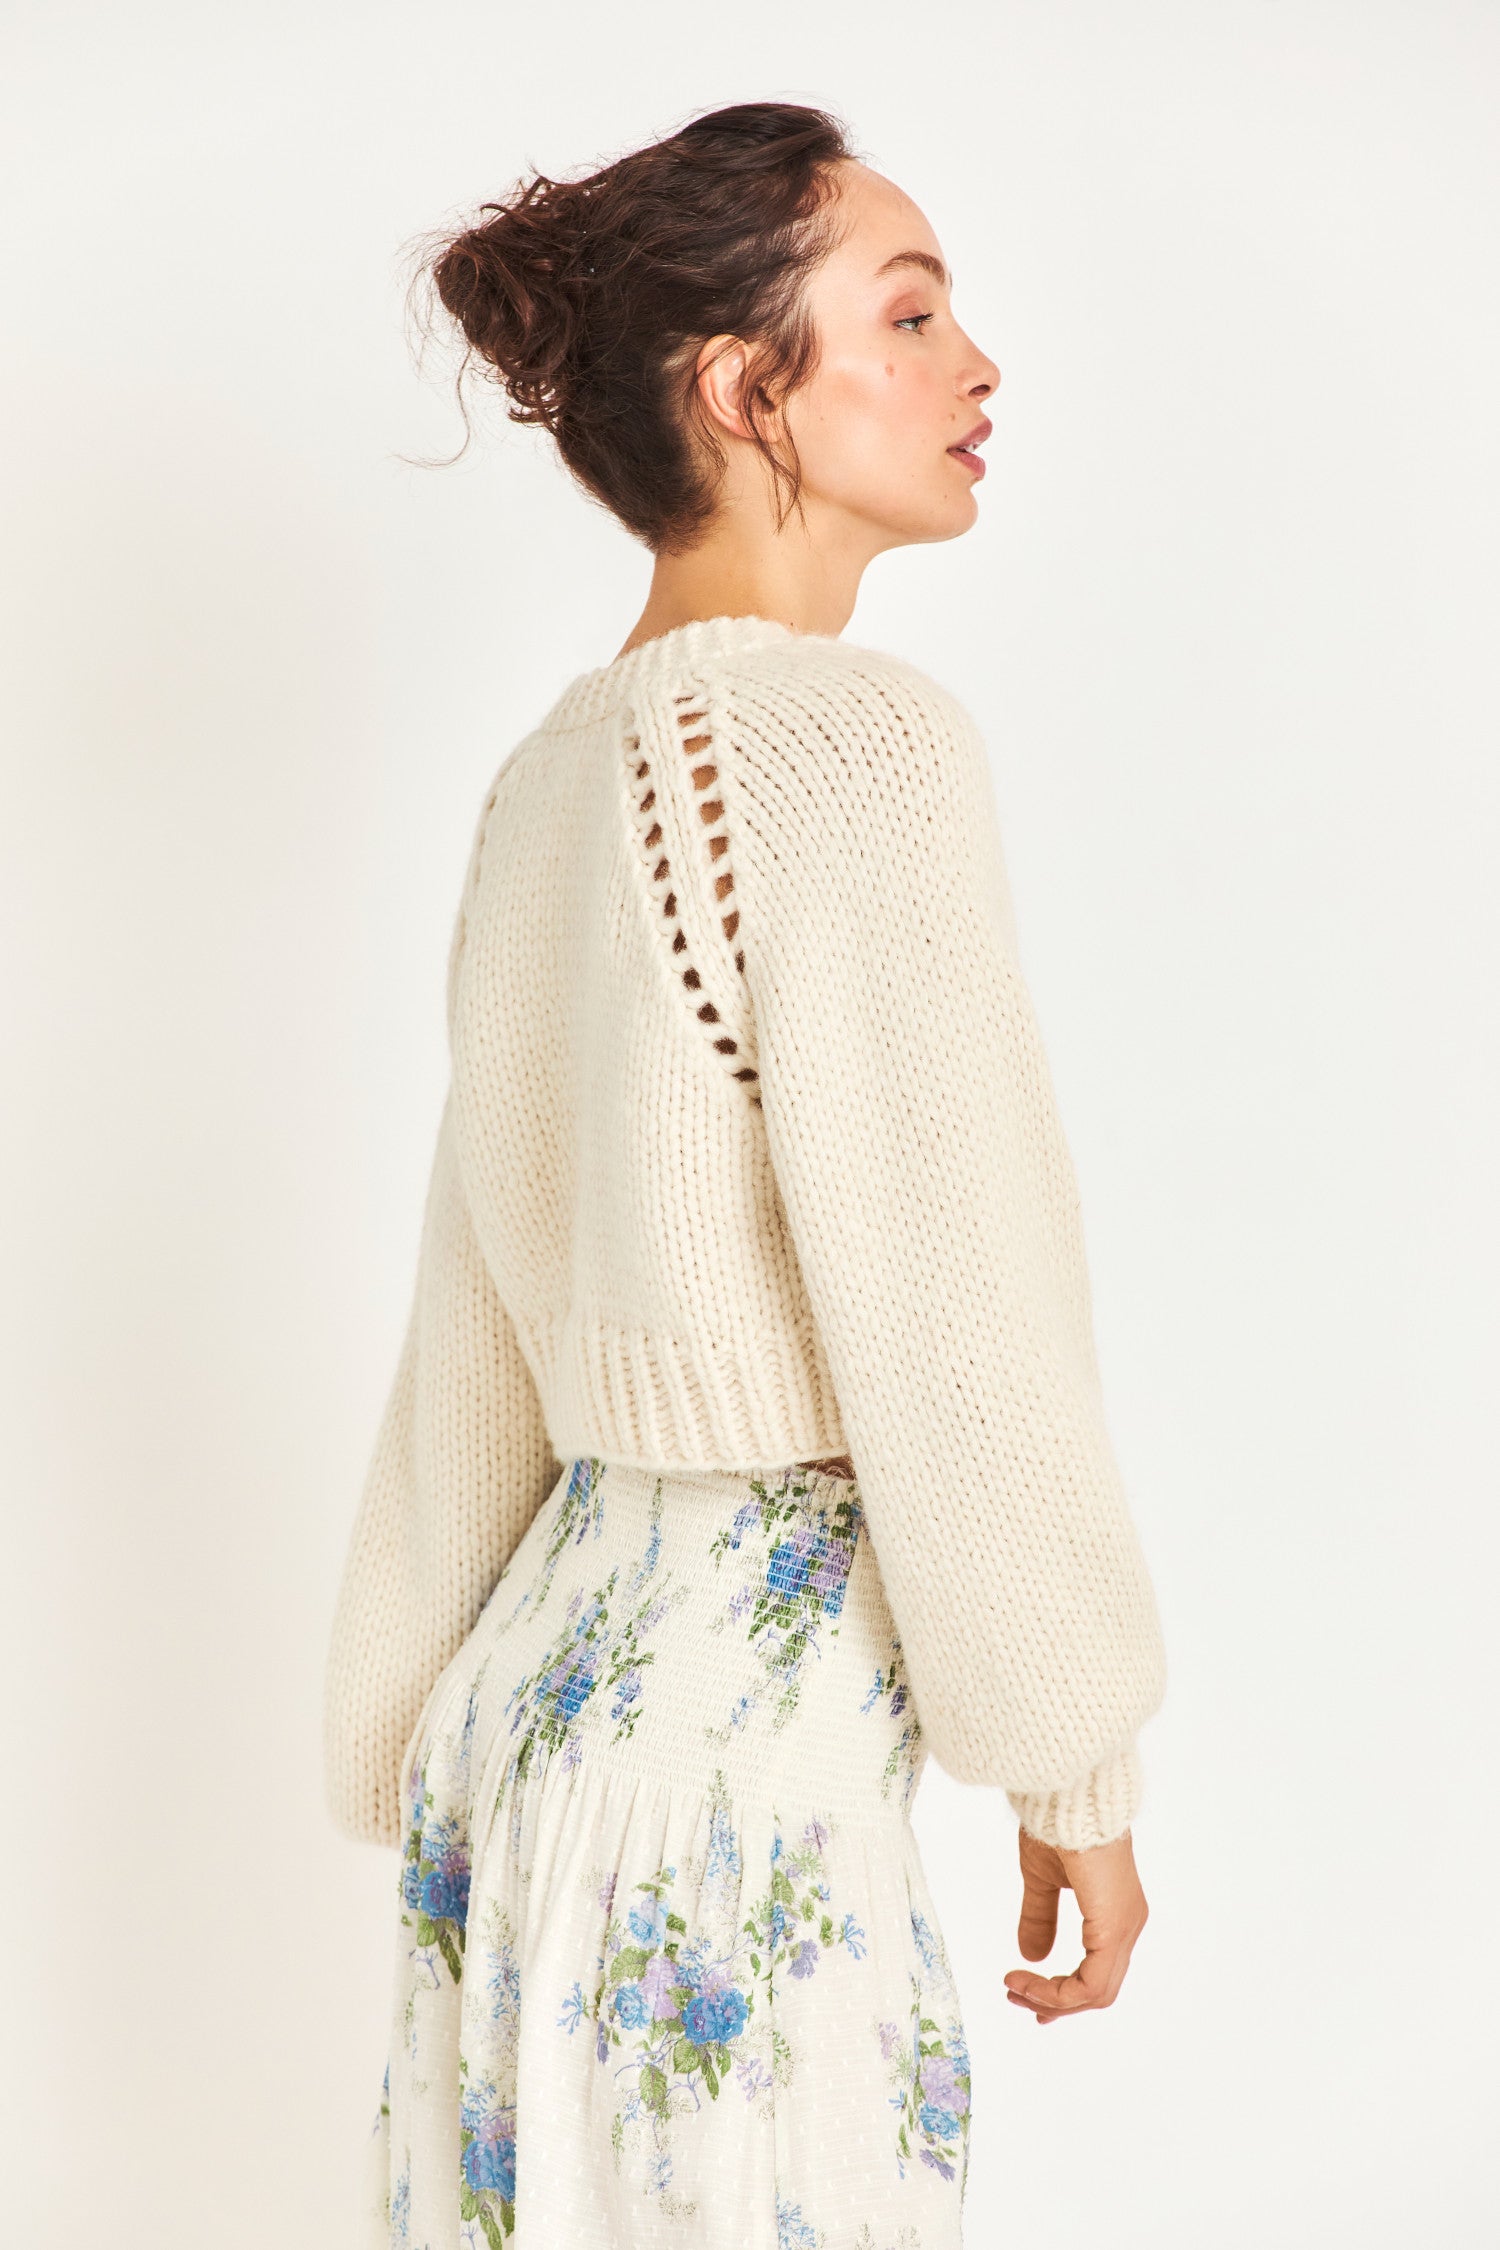 Marshe Crop Cardigan - Women's Sweaters and Knits| Shop